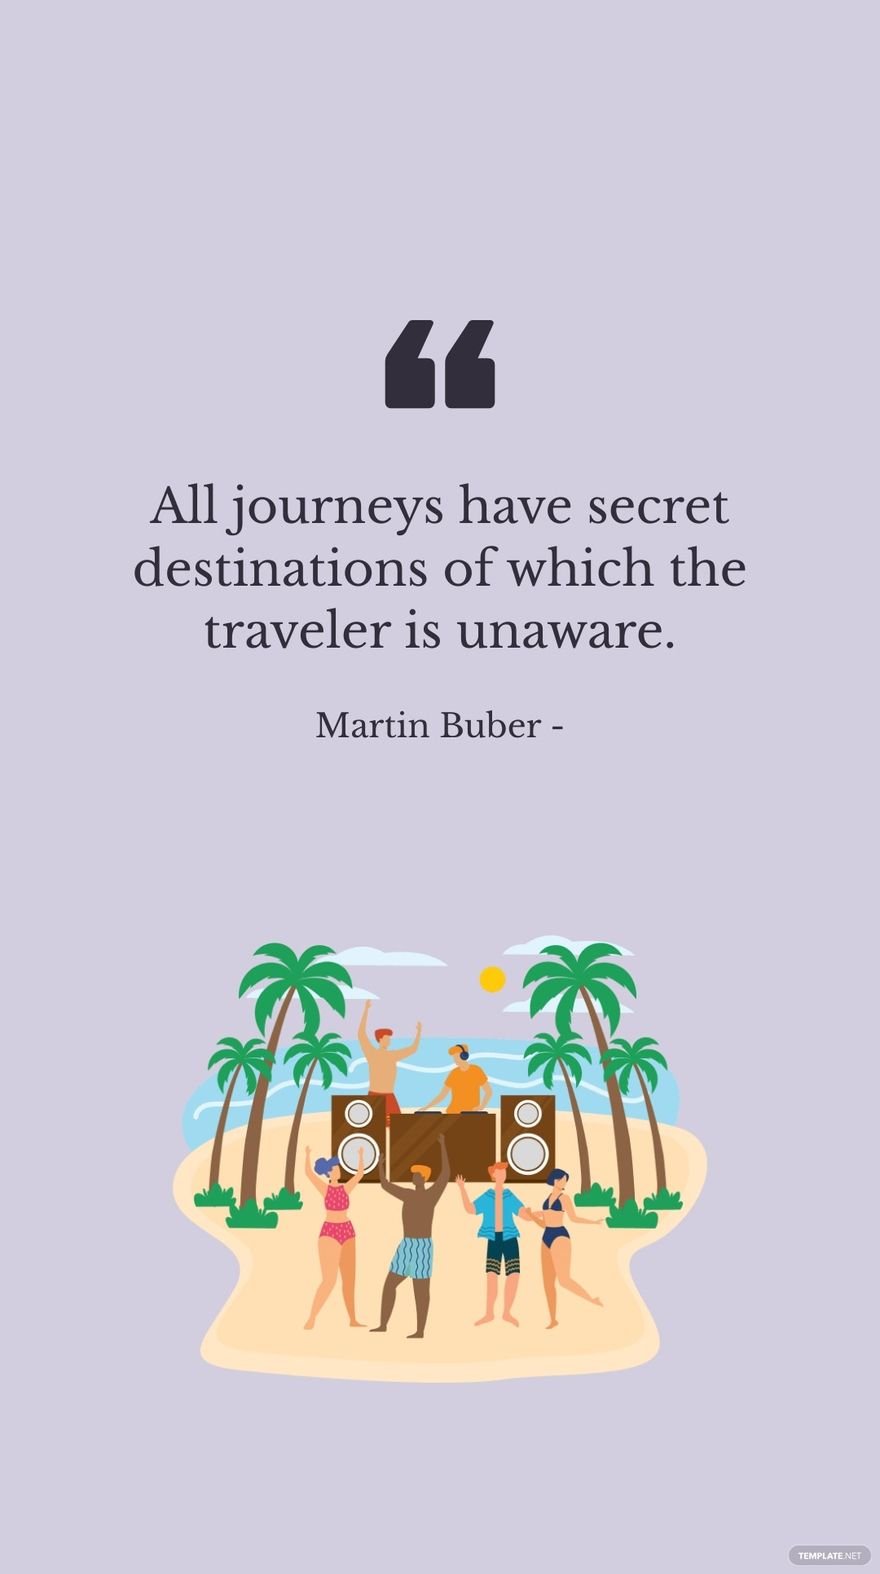 Martin Buber - All journeys have secret destinations of which the traveler is unaware. in JPG